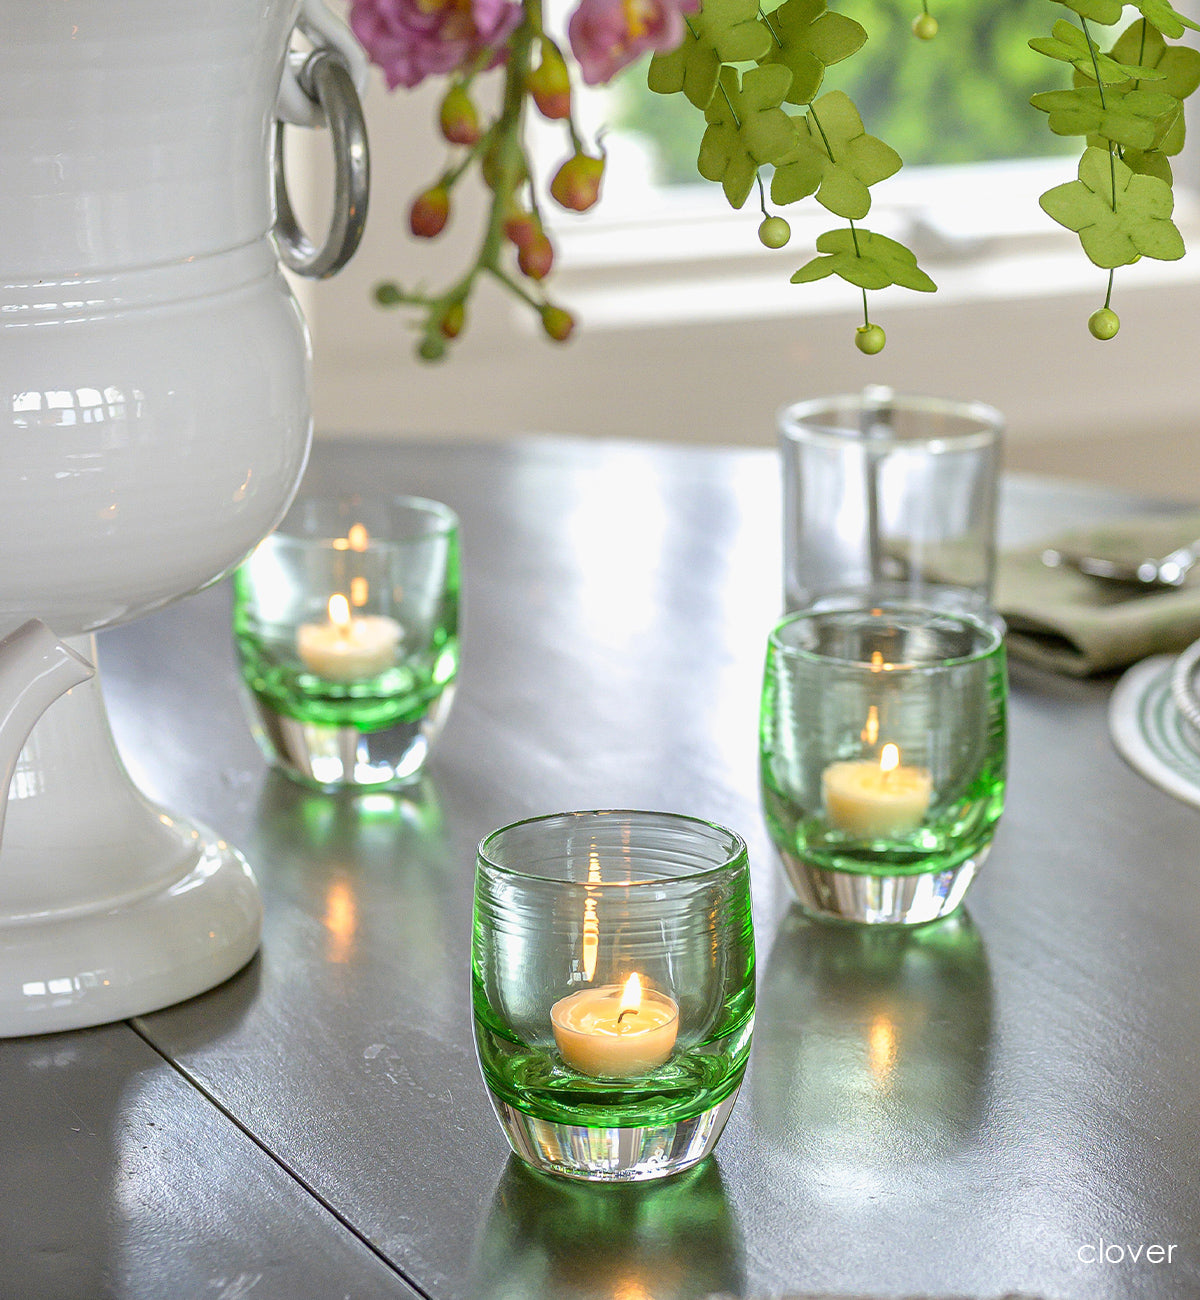 three clover, transparent light green hand-blown glass votive candle holders on a dining room table with a large vase of flowers and diningware.